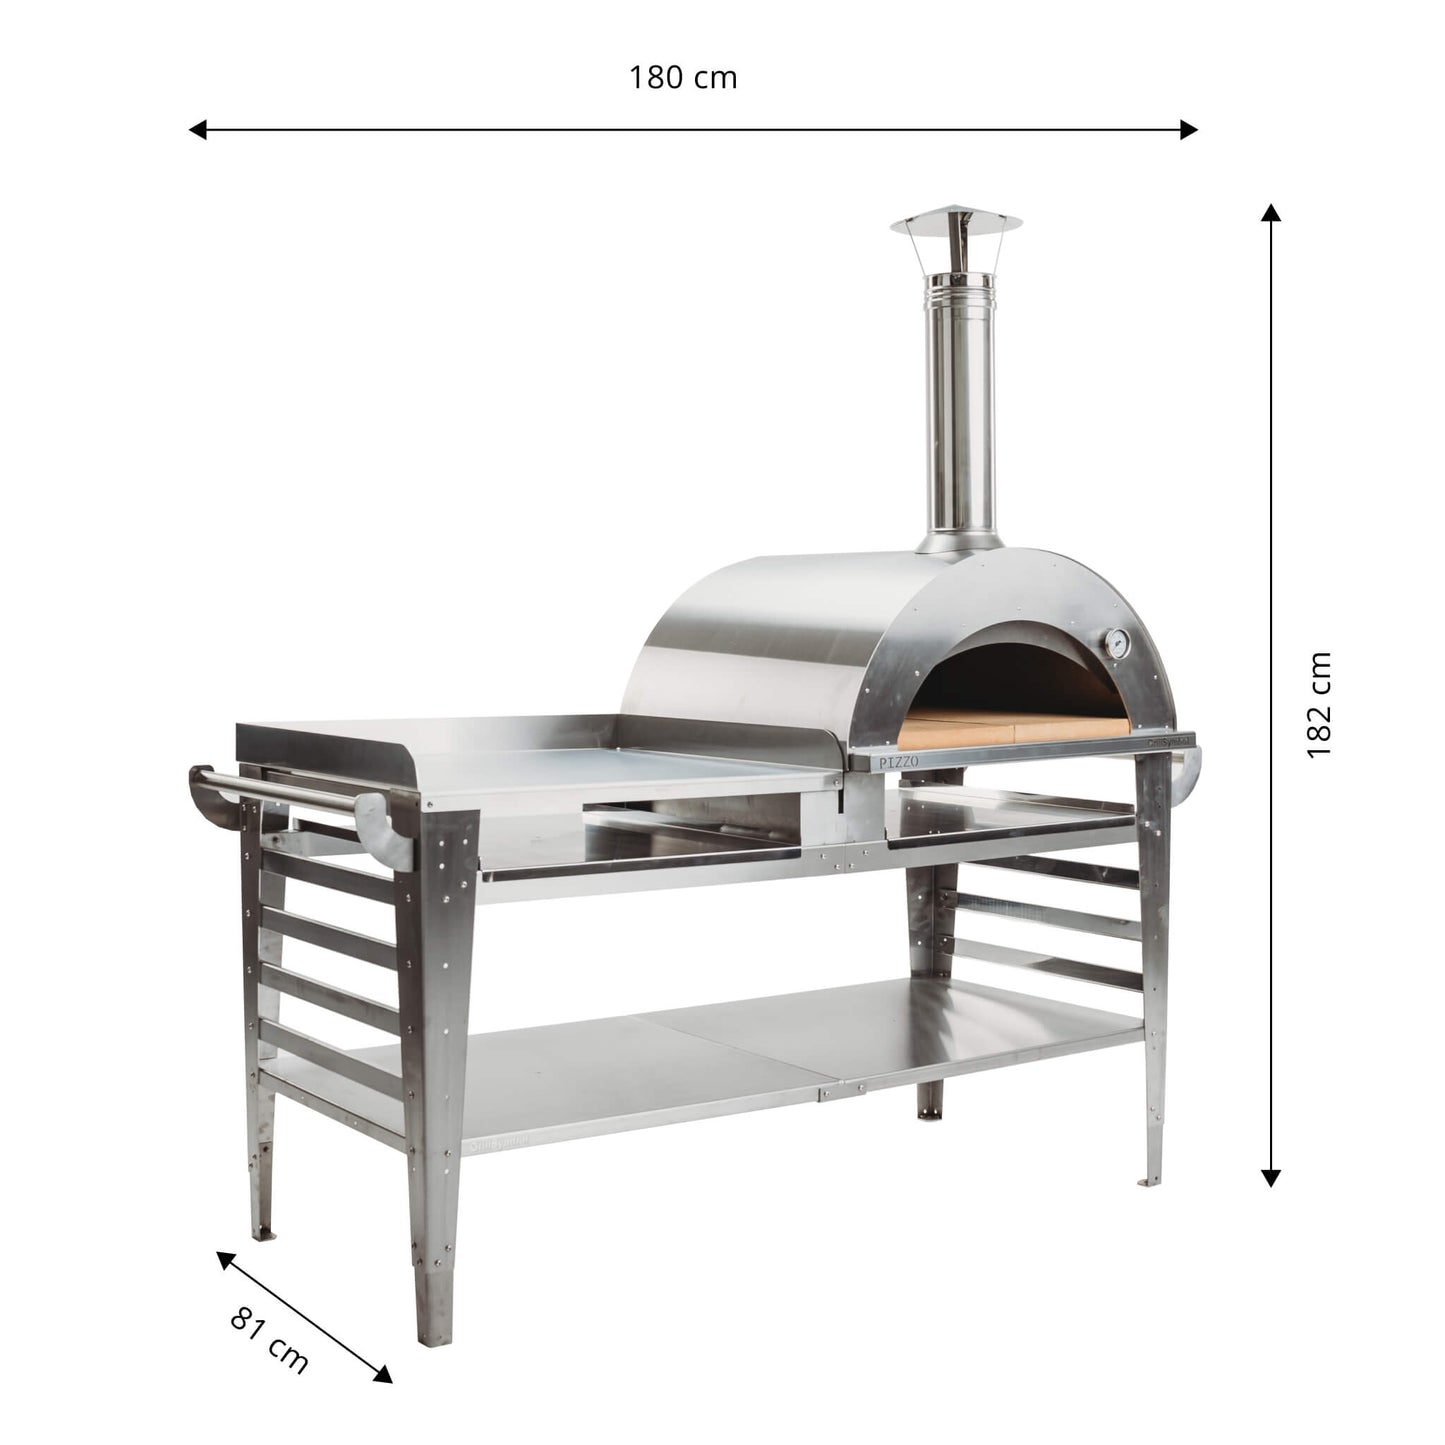 Grill Symbol - Wood Fired Pizza Oven with Stand and Side Table Pizzo-XL-Set-inox - Timeout Gardens